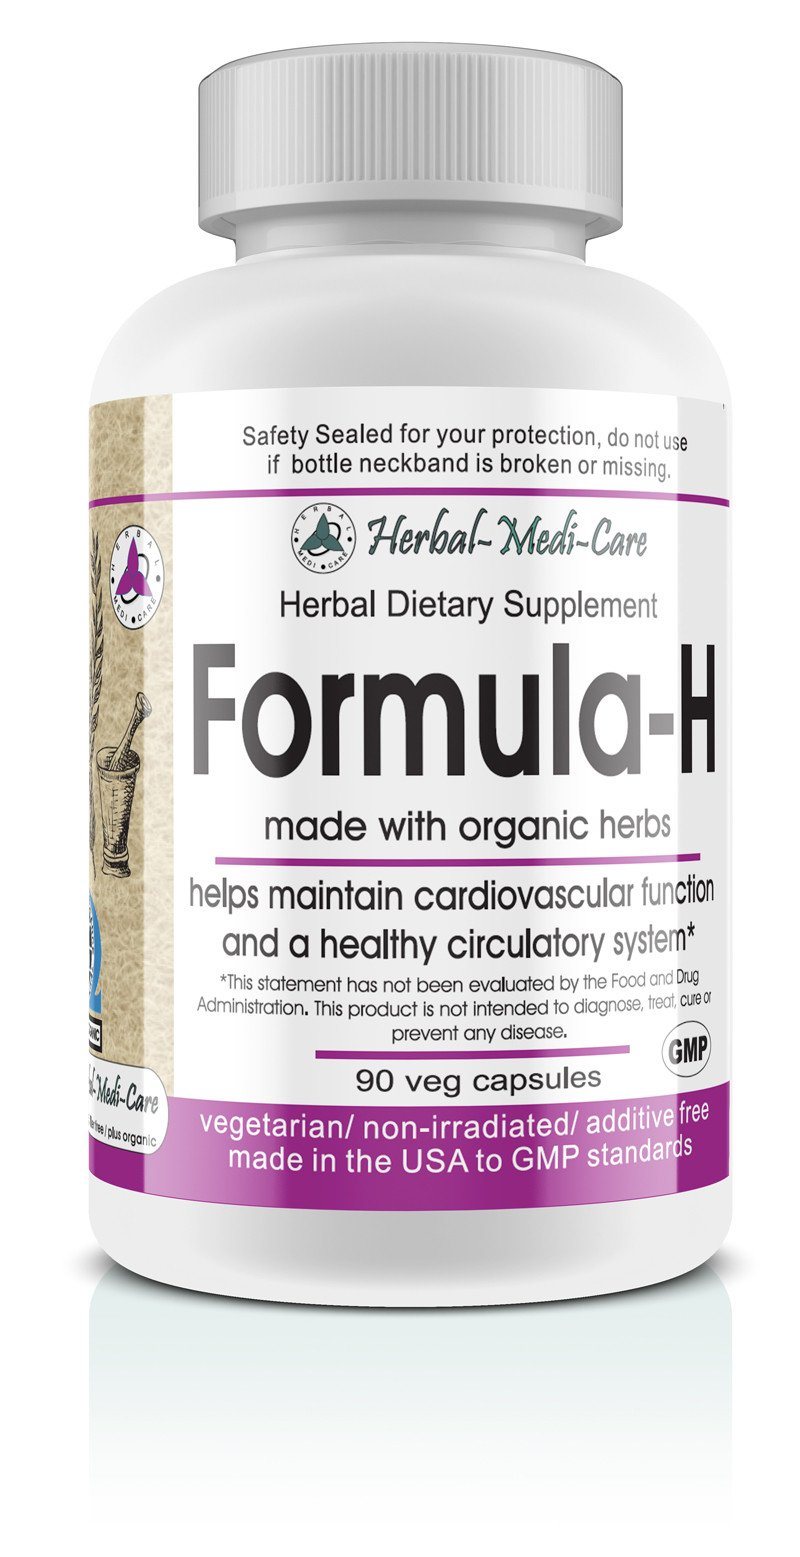 Herbal-Medi-Care Whole Food Formula-H (Blood Pressure) Vegetarian Capsules; 90-Count, Made with Organic - Herbal-Medi-Care Whole Food Formula-H (Blood Pressure) Vegetarian Capsules; 90-Count, Made with Organic - Herbal-Medi-Care Whole Food Formula-H (Blood Pressure) Vegetarian Capsules; 90-Count, Made with Organic